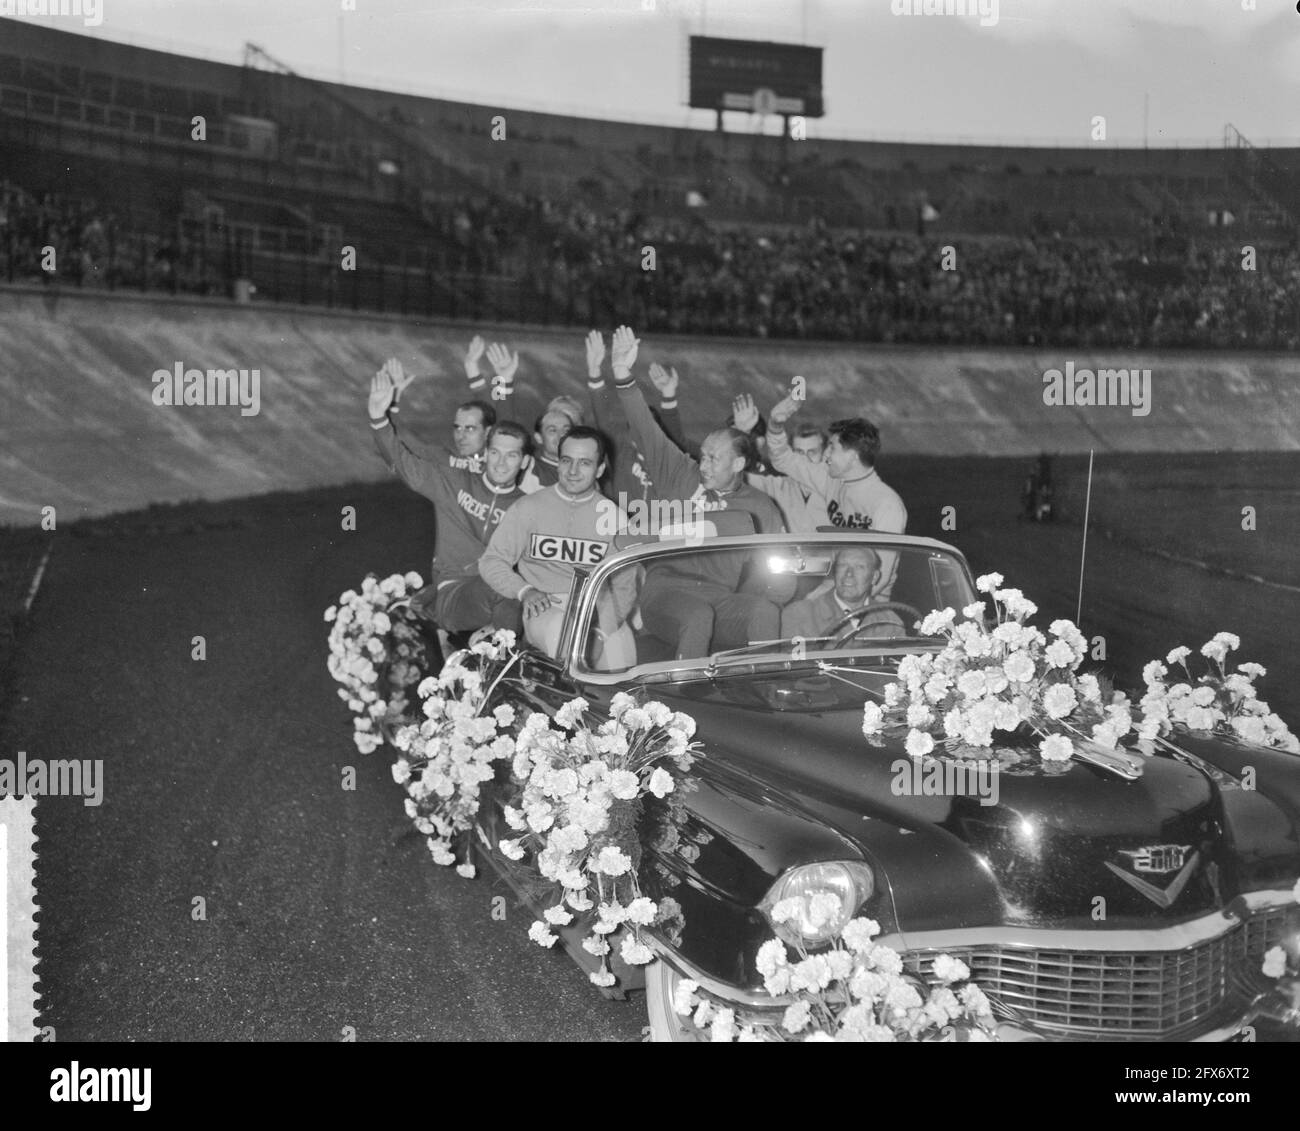 Honoring winners at the World Championships in the Olympic Stadium, from left to right Timoner, Romijn, Koch, Burs, Derksen, Nijdam, Maspes, De Lettre, August 15, 1960, Winners, honors, world championships, The Netherlands, 20th century press agency photo, news to remember, documentary, historic photography 1945-1990, visual stories, human history of the Twentieth Century, capturing moments in time Stock Photo